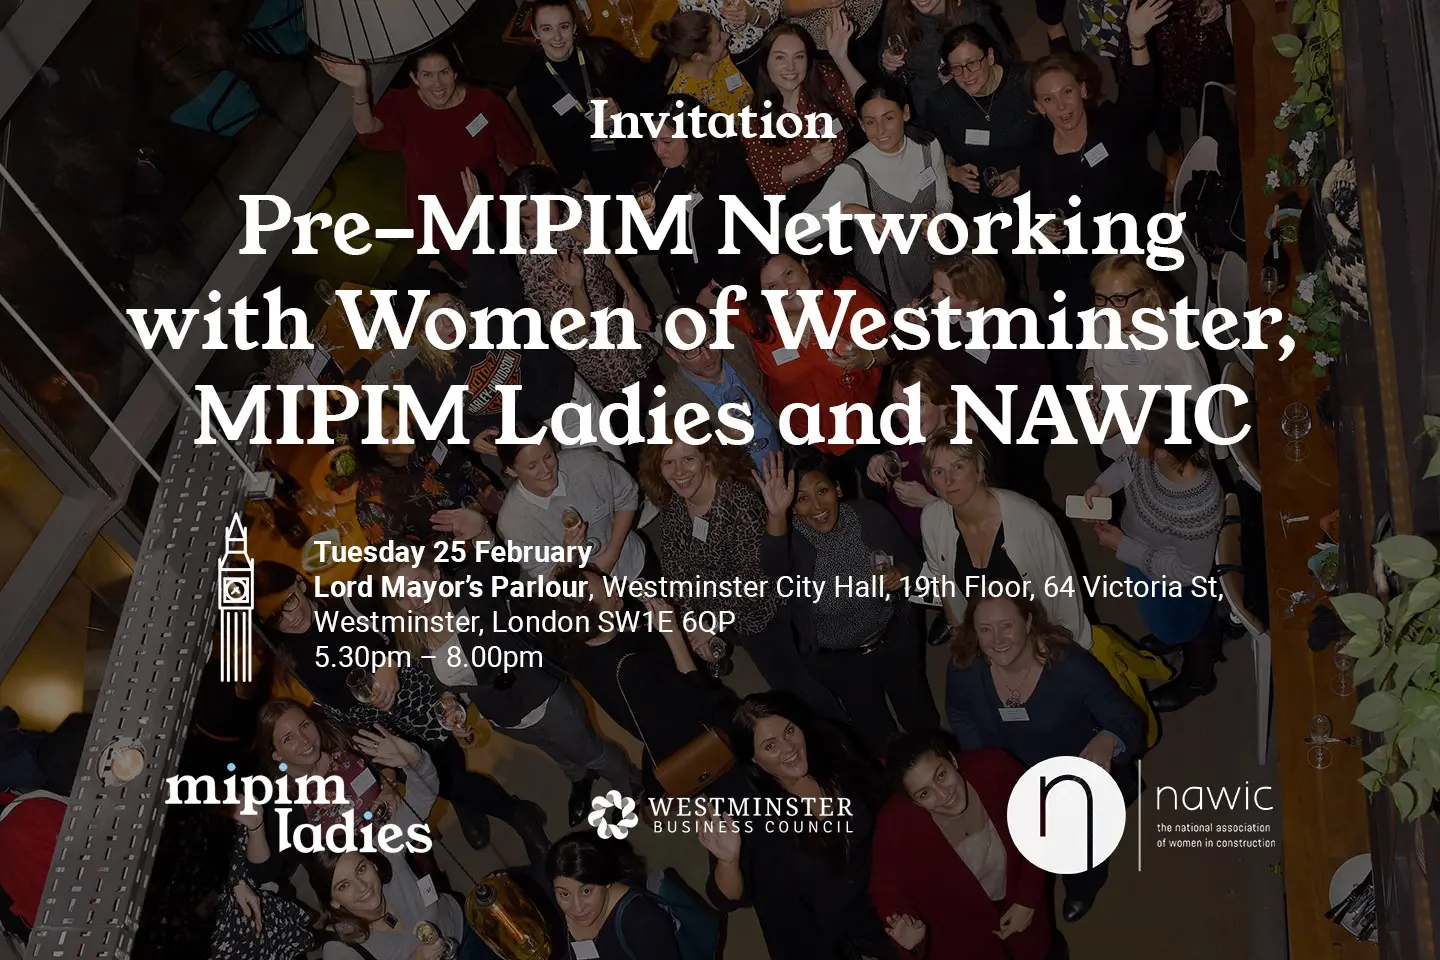 Hamlins sponsor Pre-MIPIM Networking with Women of Westminster, MIPIM Ladies and NAWIC